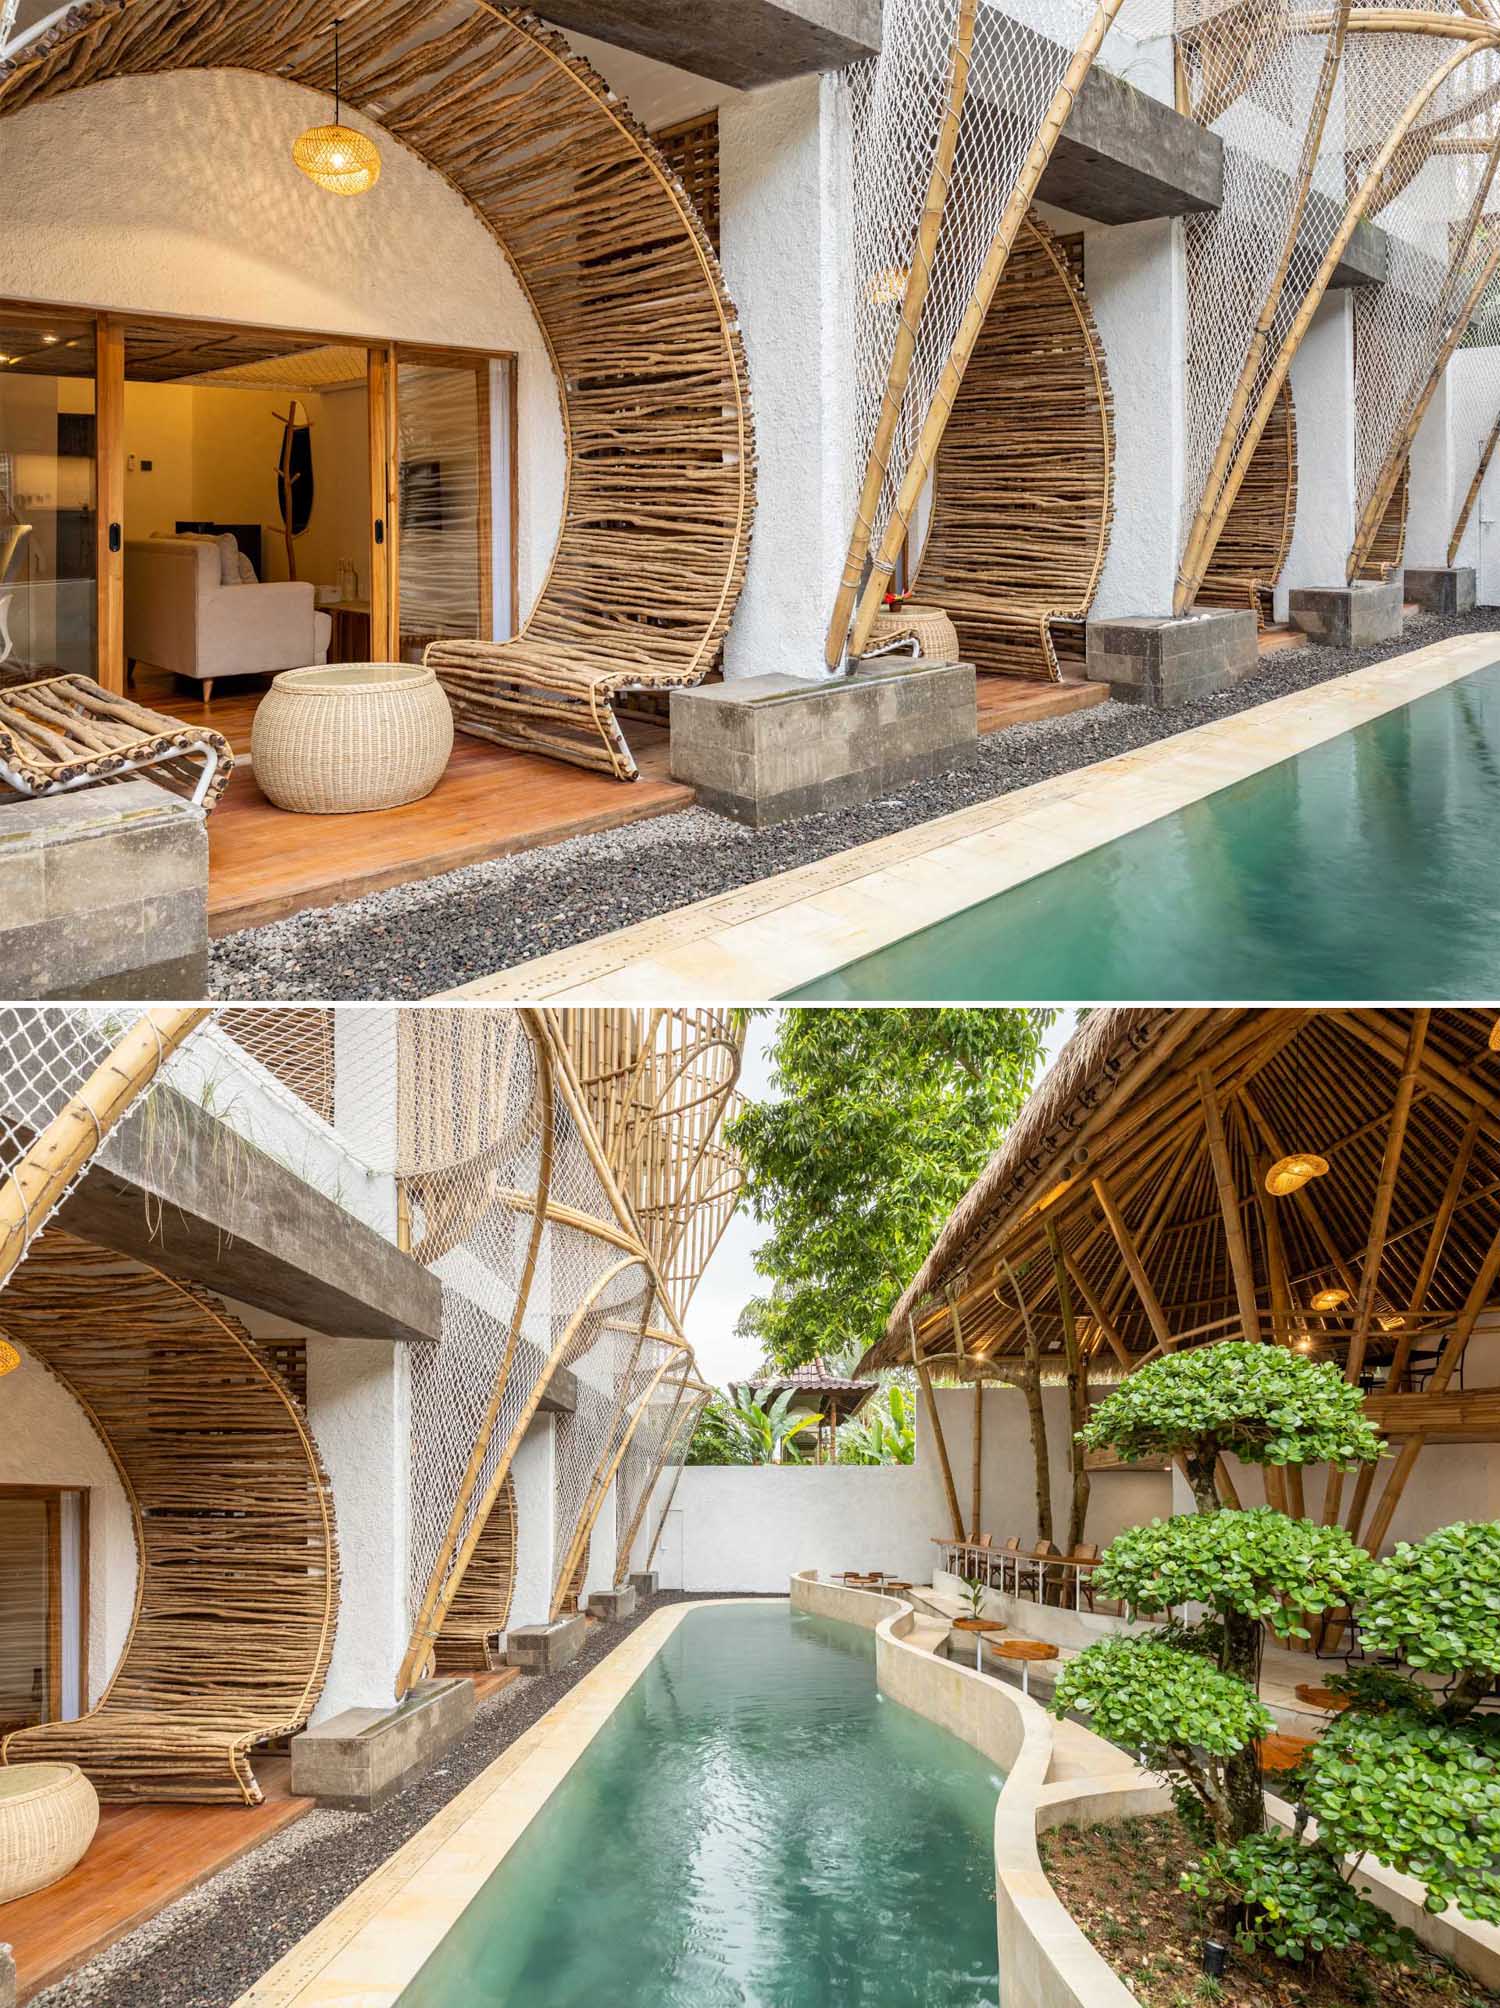 Curved built-in lounge seats made from coffee branches have been used to furnish the balcony on this micro-apartment.